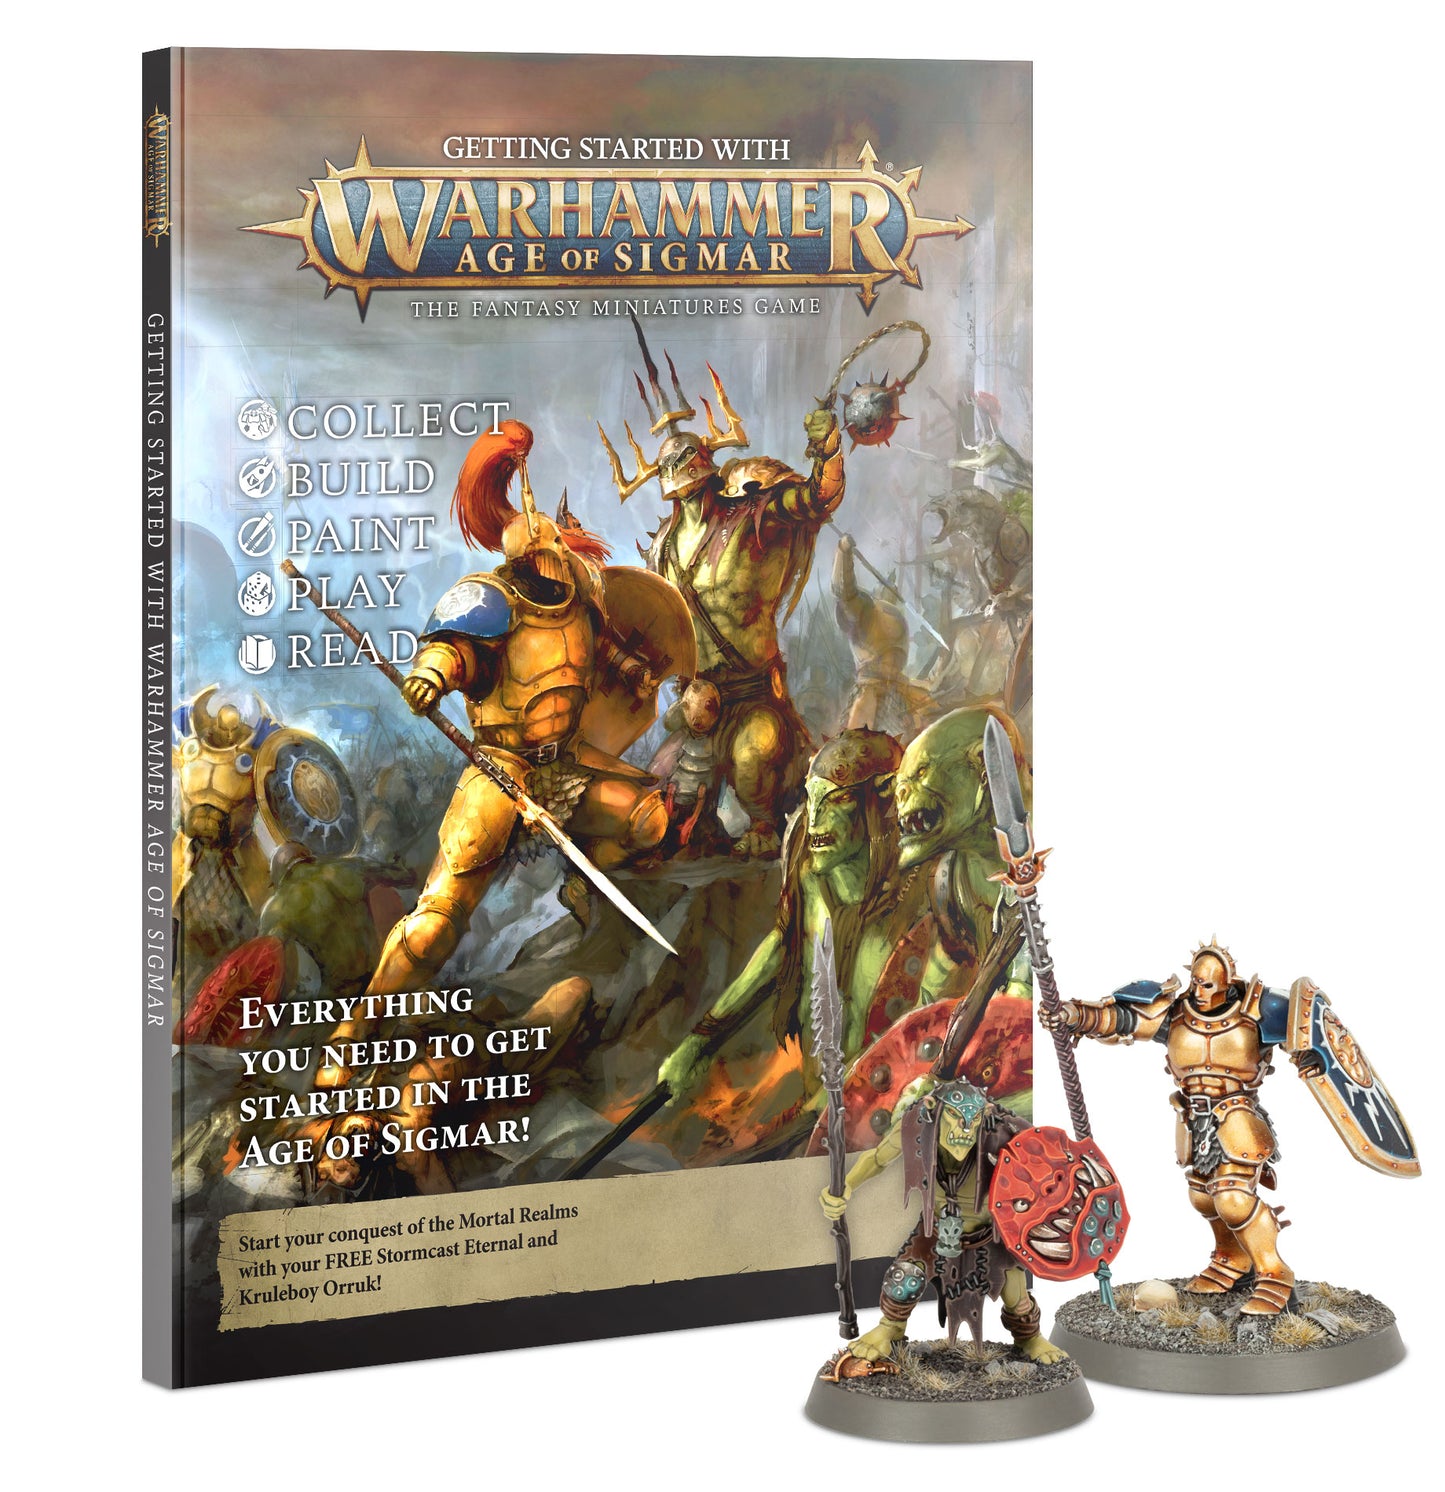 Warhammer Age of Sigmar GETTING STARTED 80-16